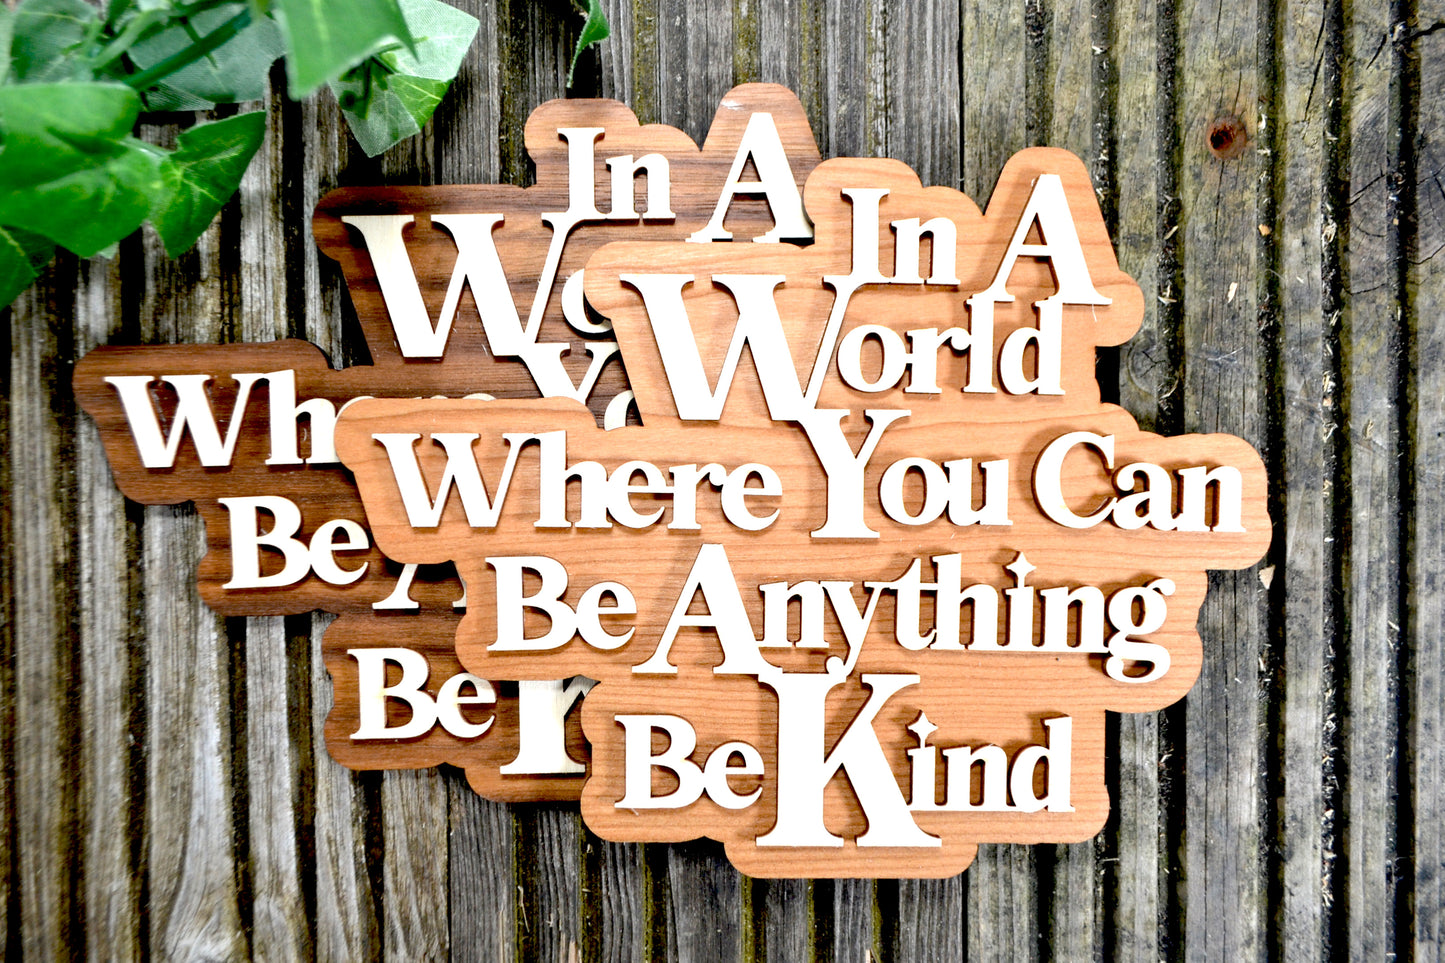 In A World Where You Can Be Anything Be Kind - Wooden Plaque